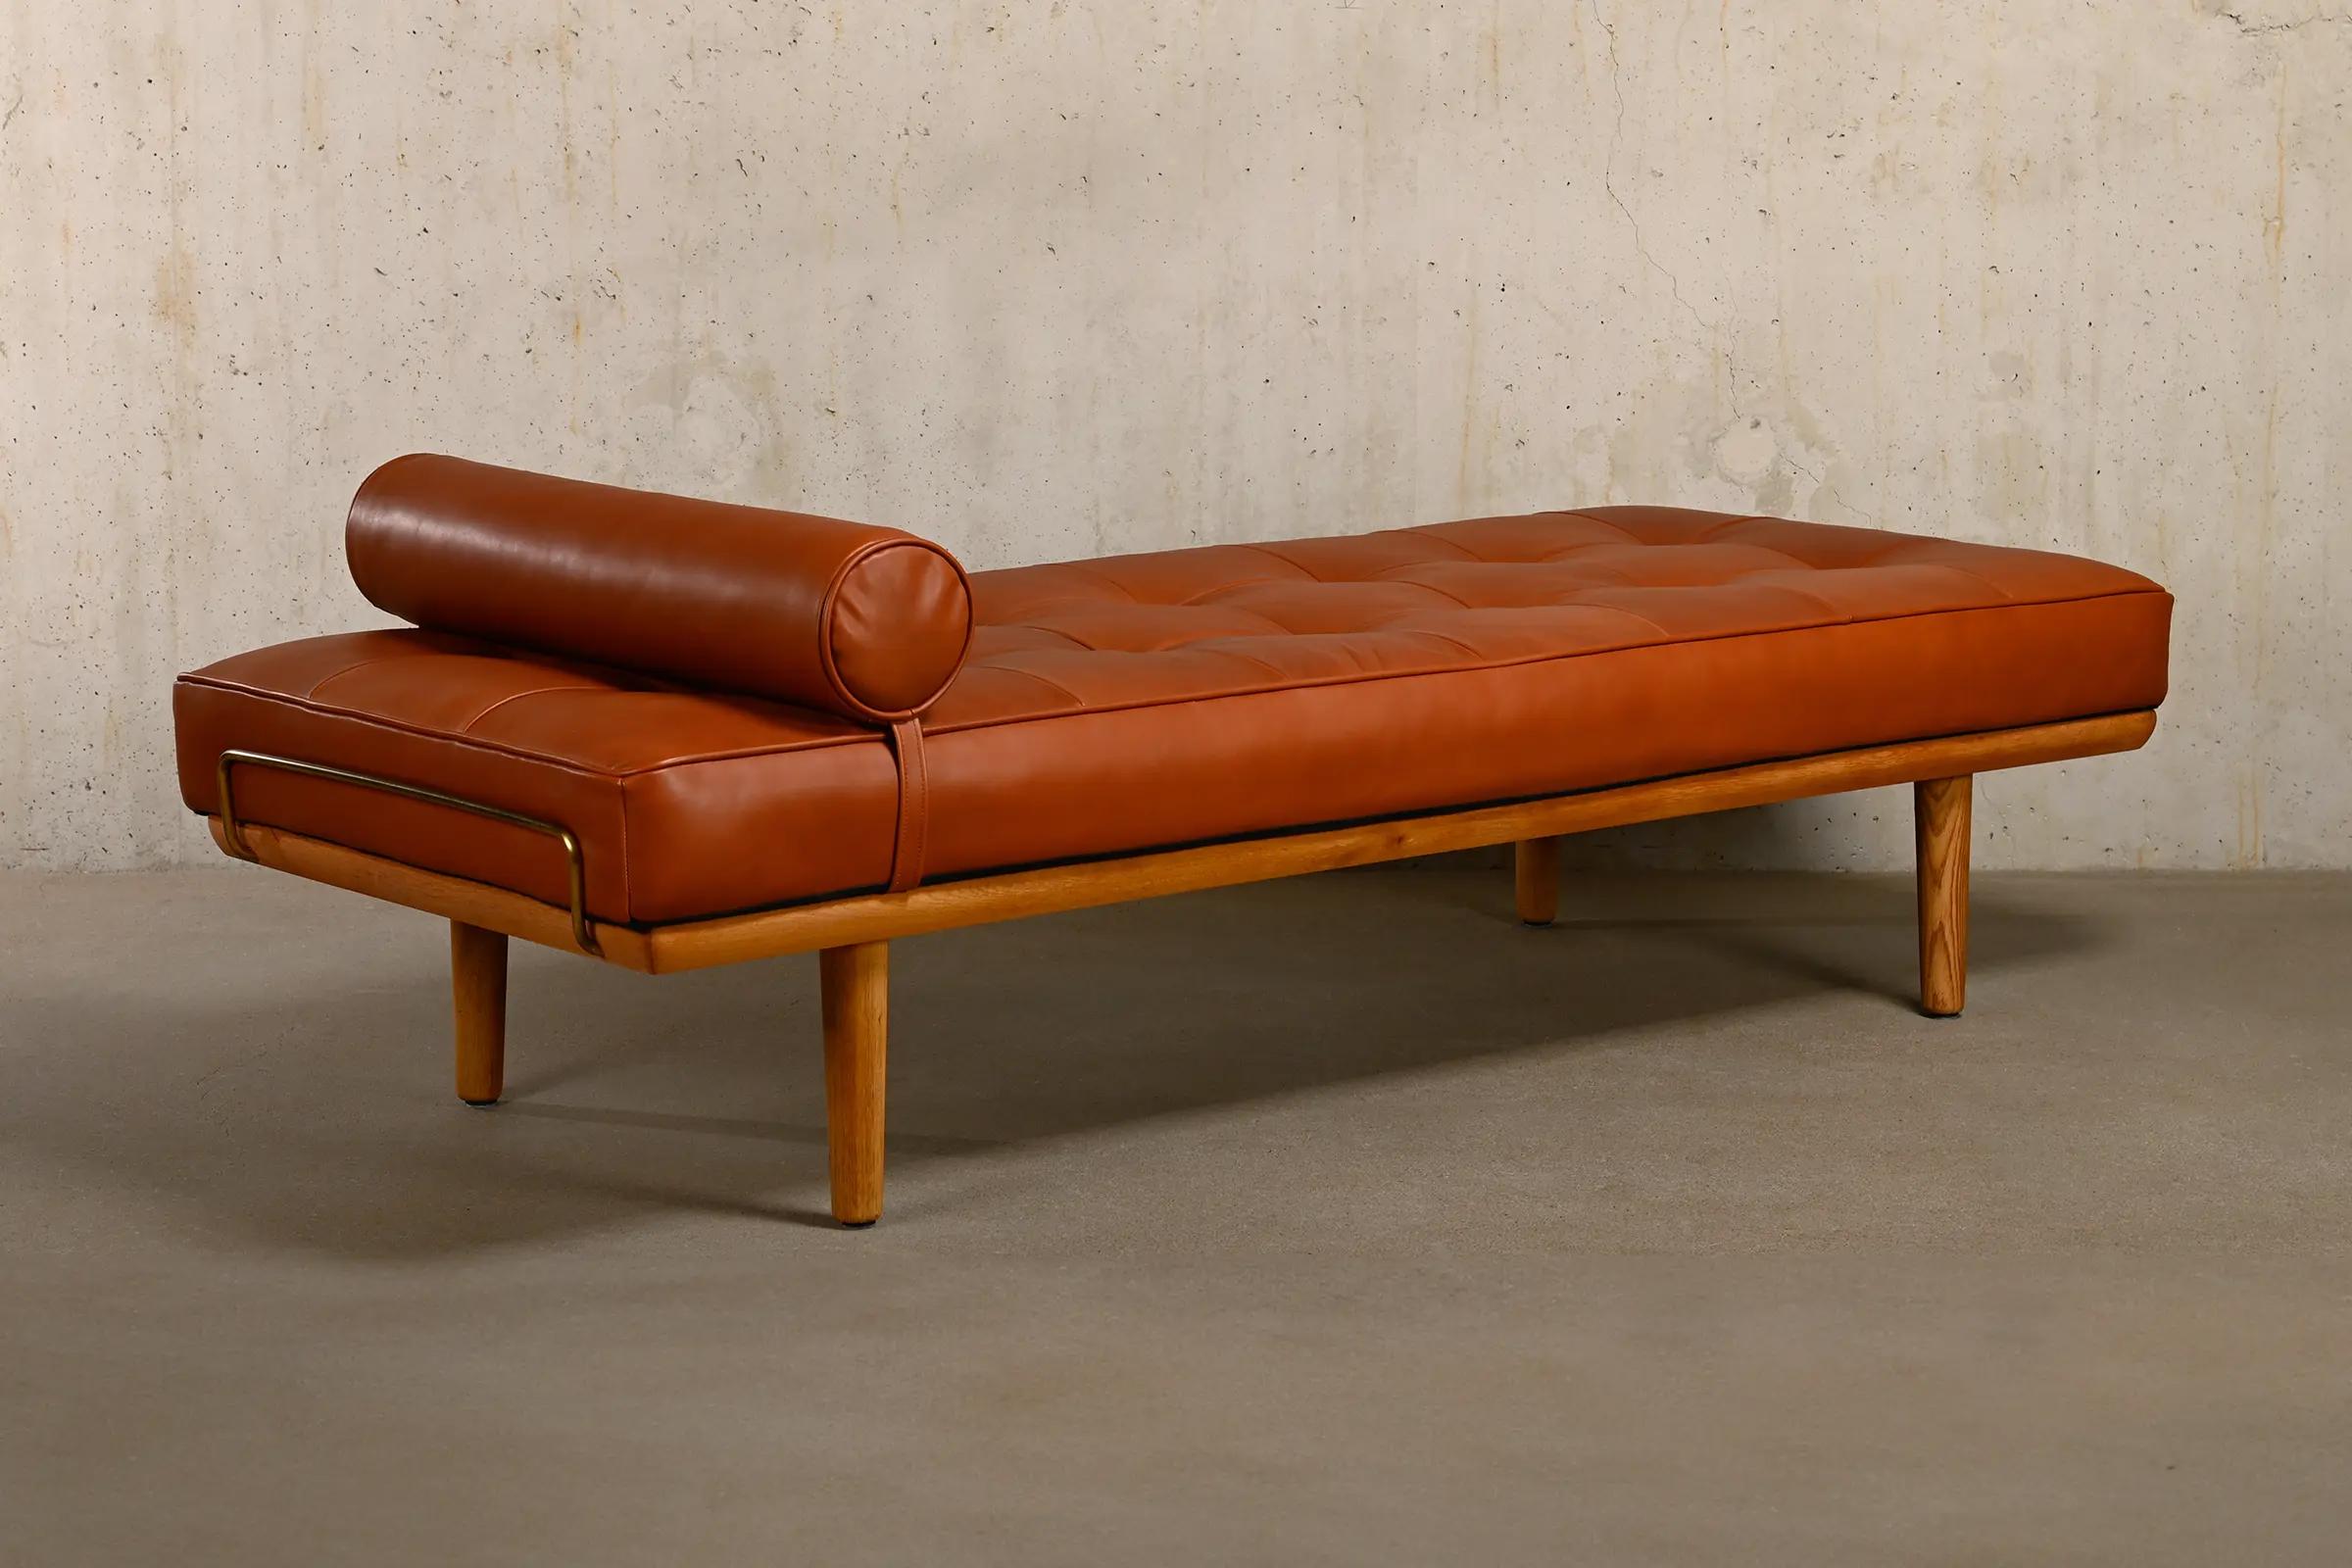 Beautiful Daybed Model GE19 designed by Hans J. Wegner for Getama Denmark 1960s. Oak frame with tapered legs and brass brackets in very good condition with minor traces of use. Original spring mattress with new neck roll pillow upholstered in